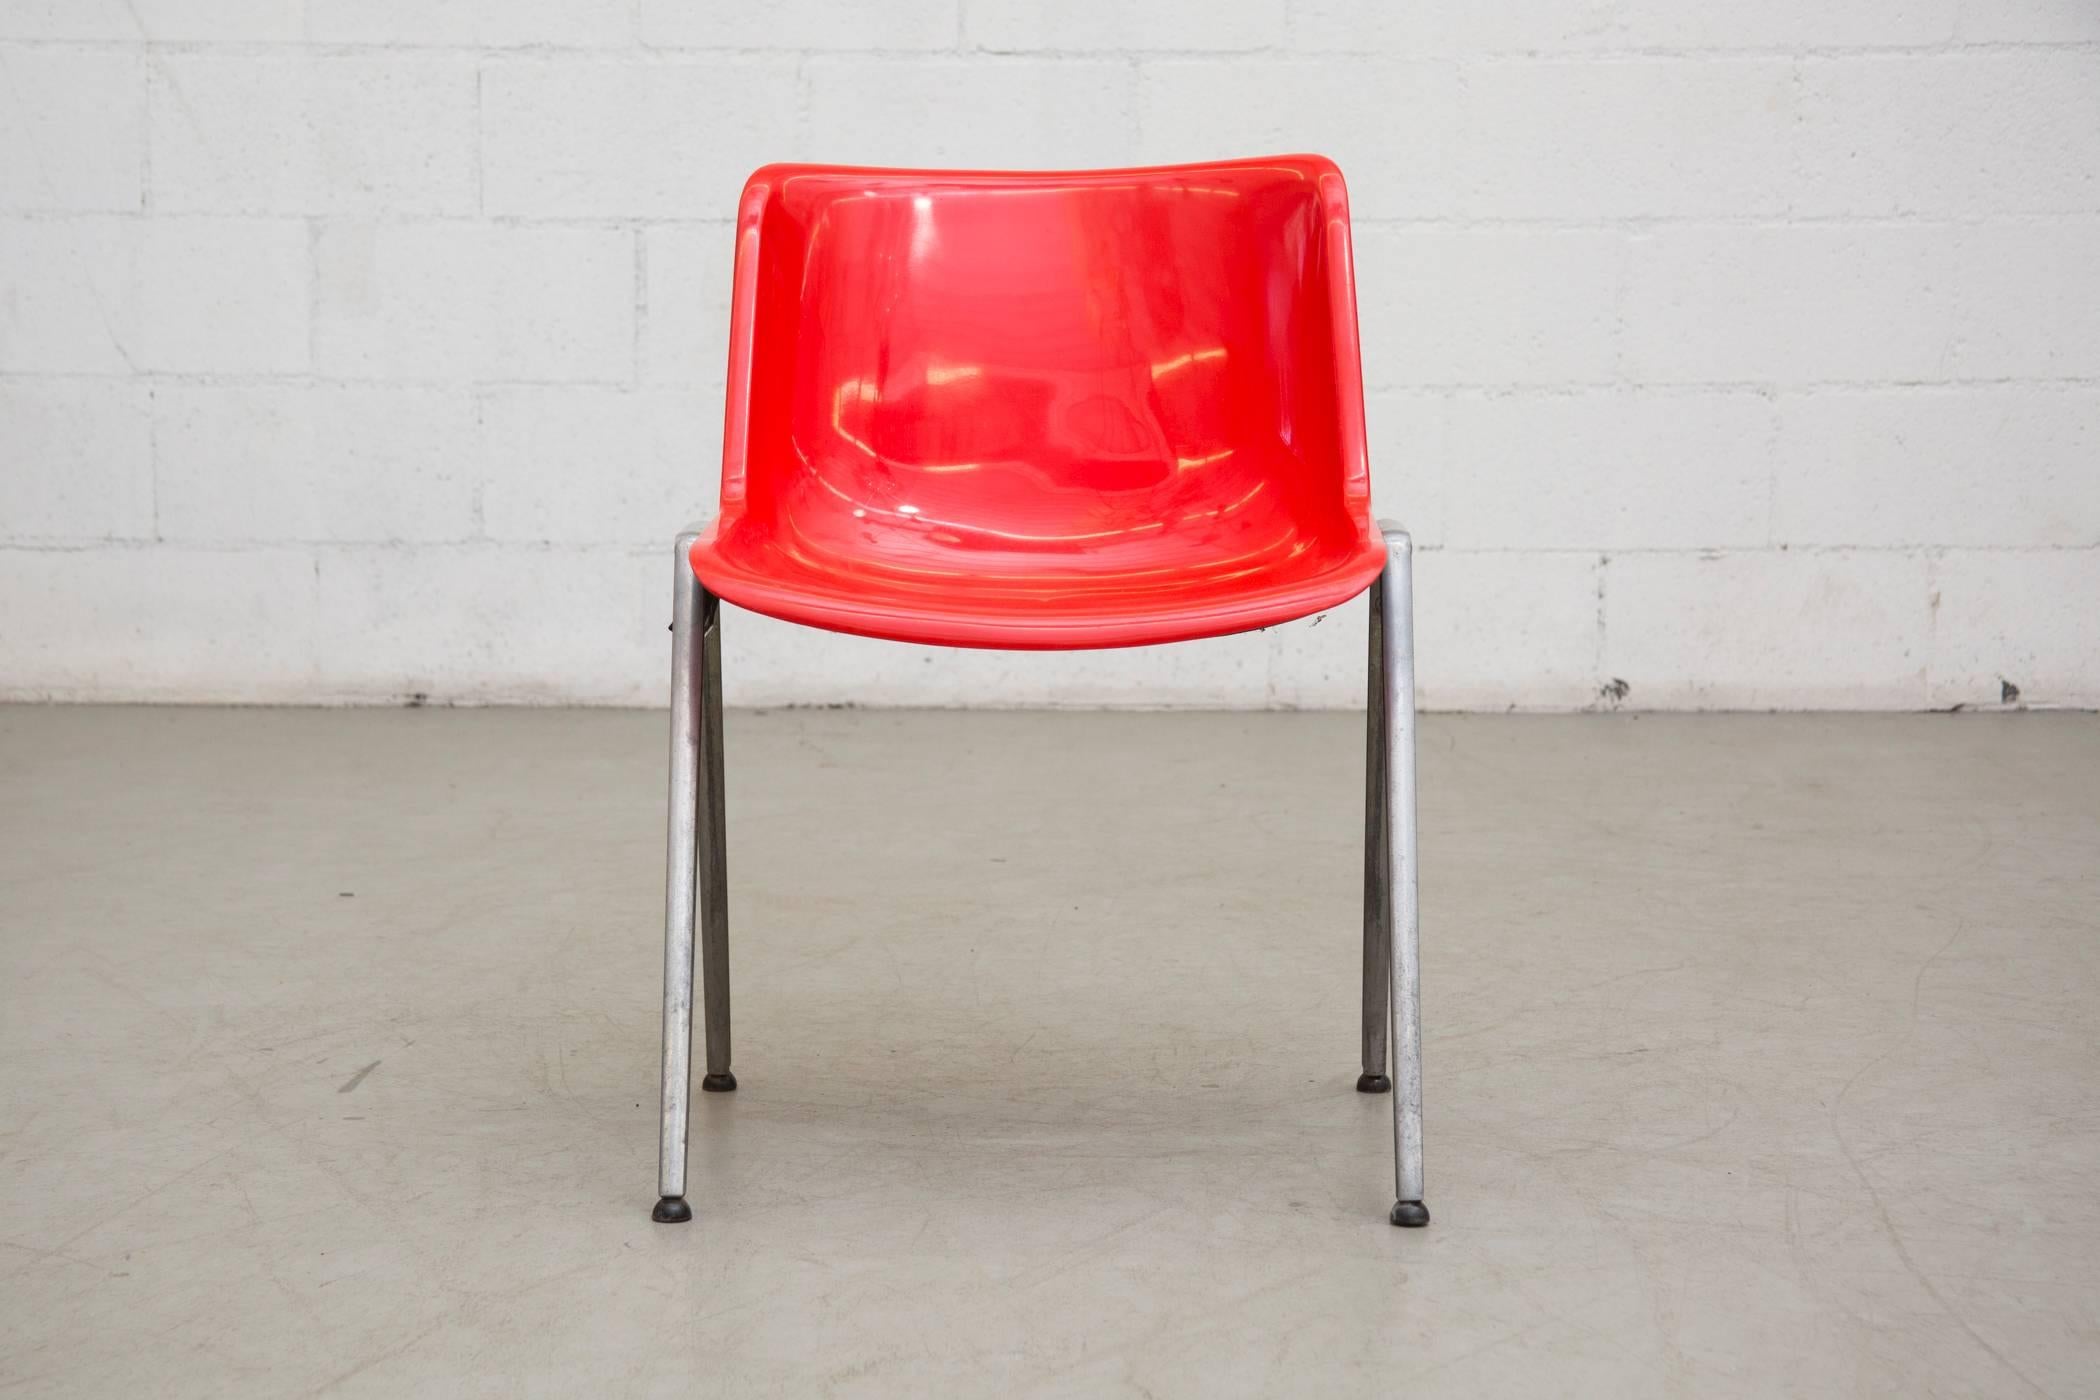 Red stacking chairs by Osvaldo Borsani for Tecno, Italy. Metal frame with ABS shell. Some plastic sides are missing, visible scratching of acrylic shell, otherwise good original condition for their age and usage.